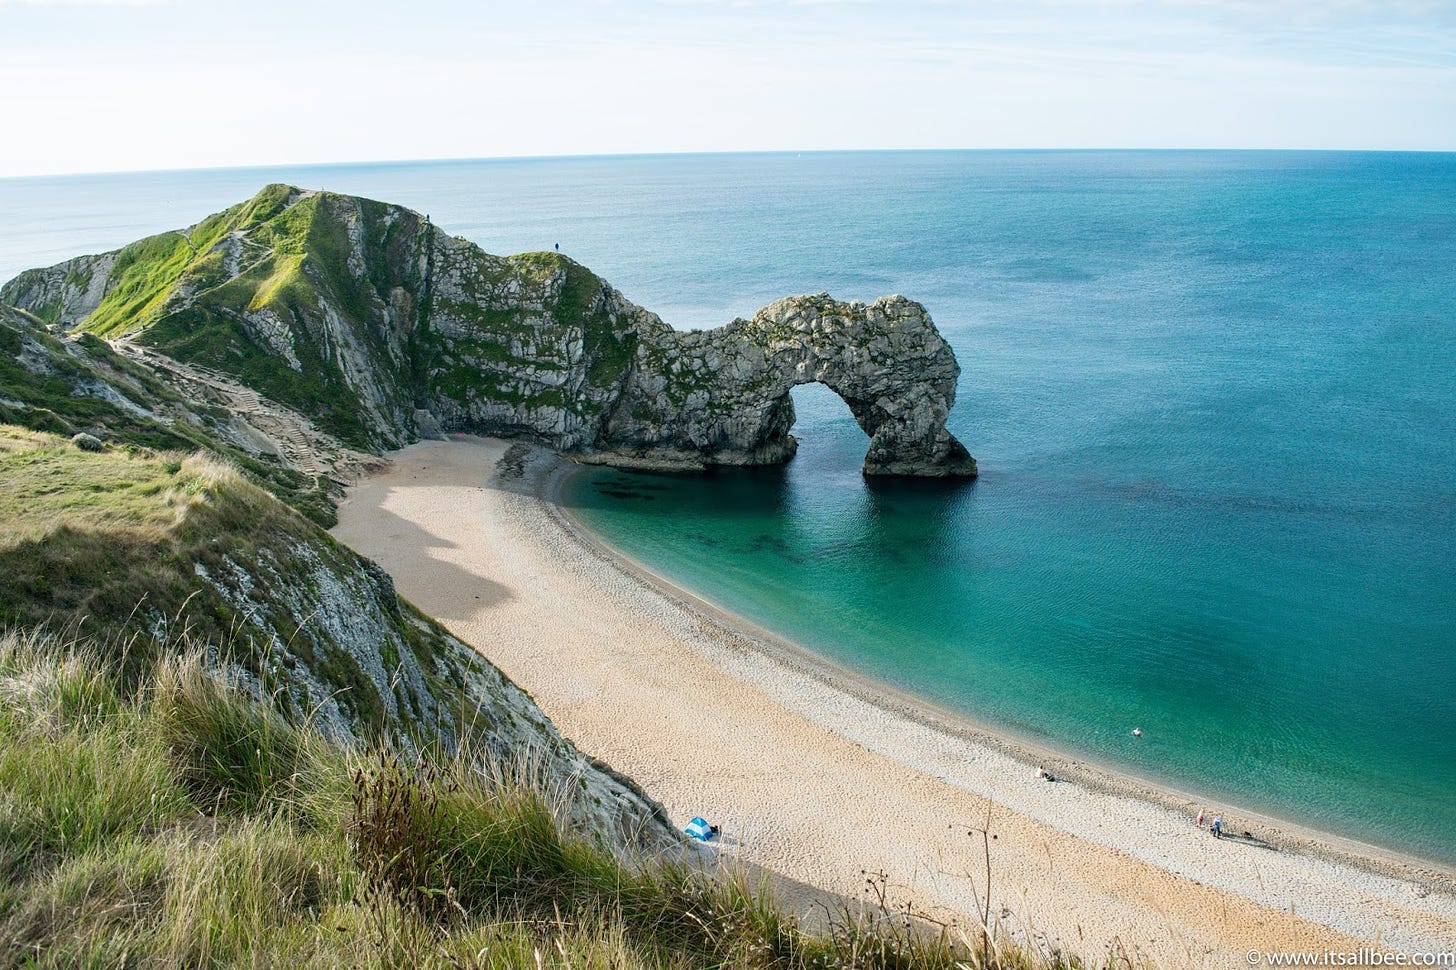 Durdle Door Camping In Dorset + 5 Things To Do on The Jurassic Coast ...